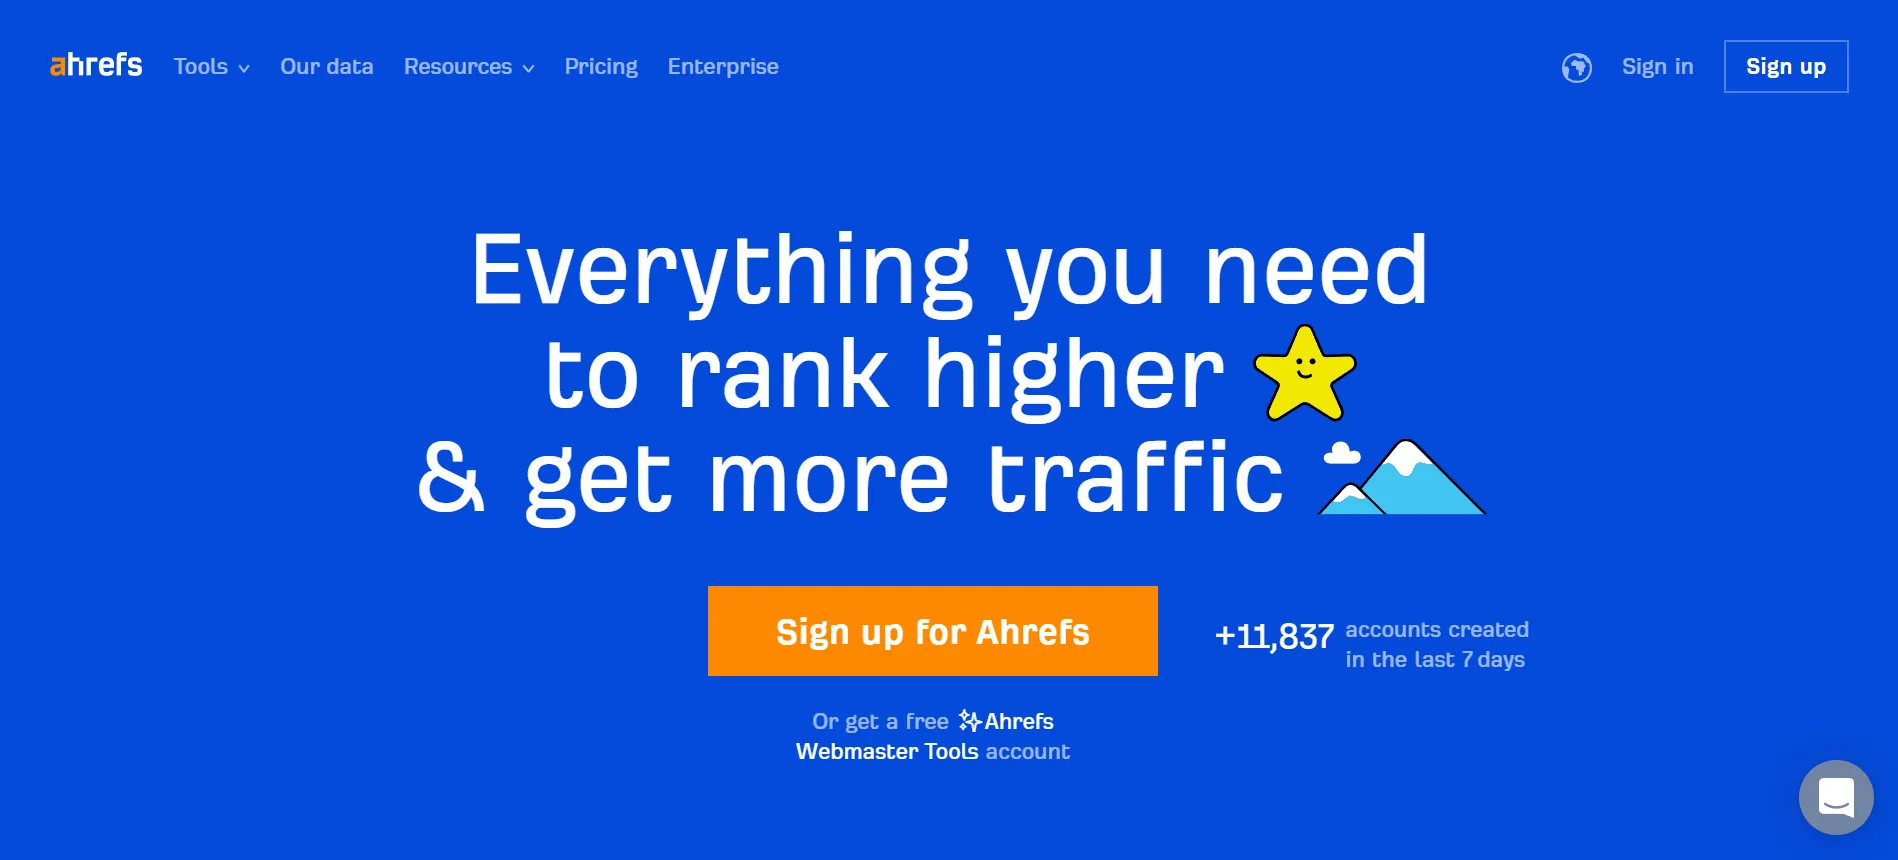 Ahrefs - content marketing and SEO tool